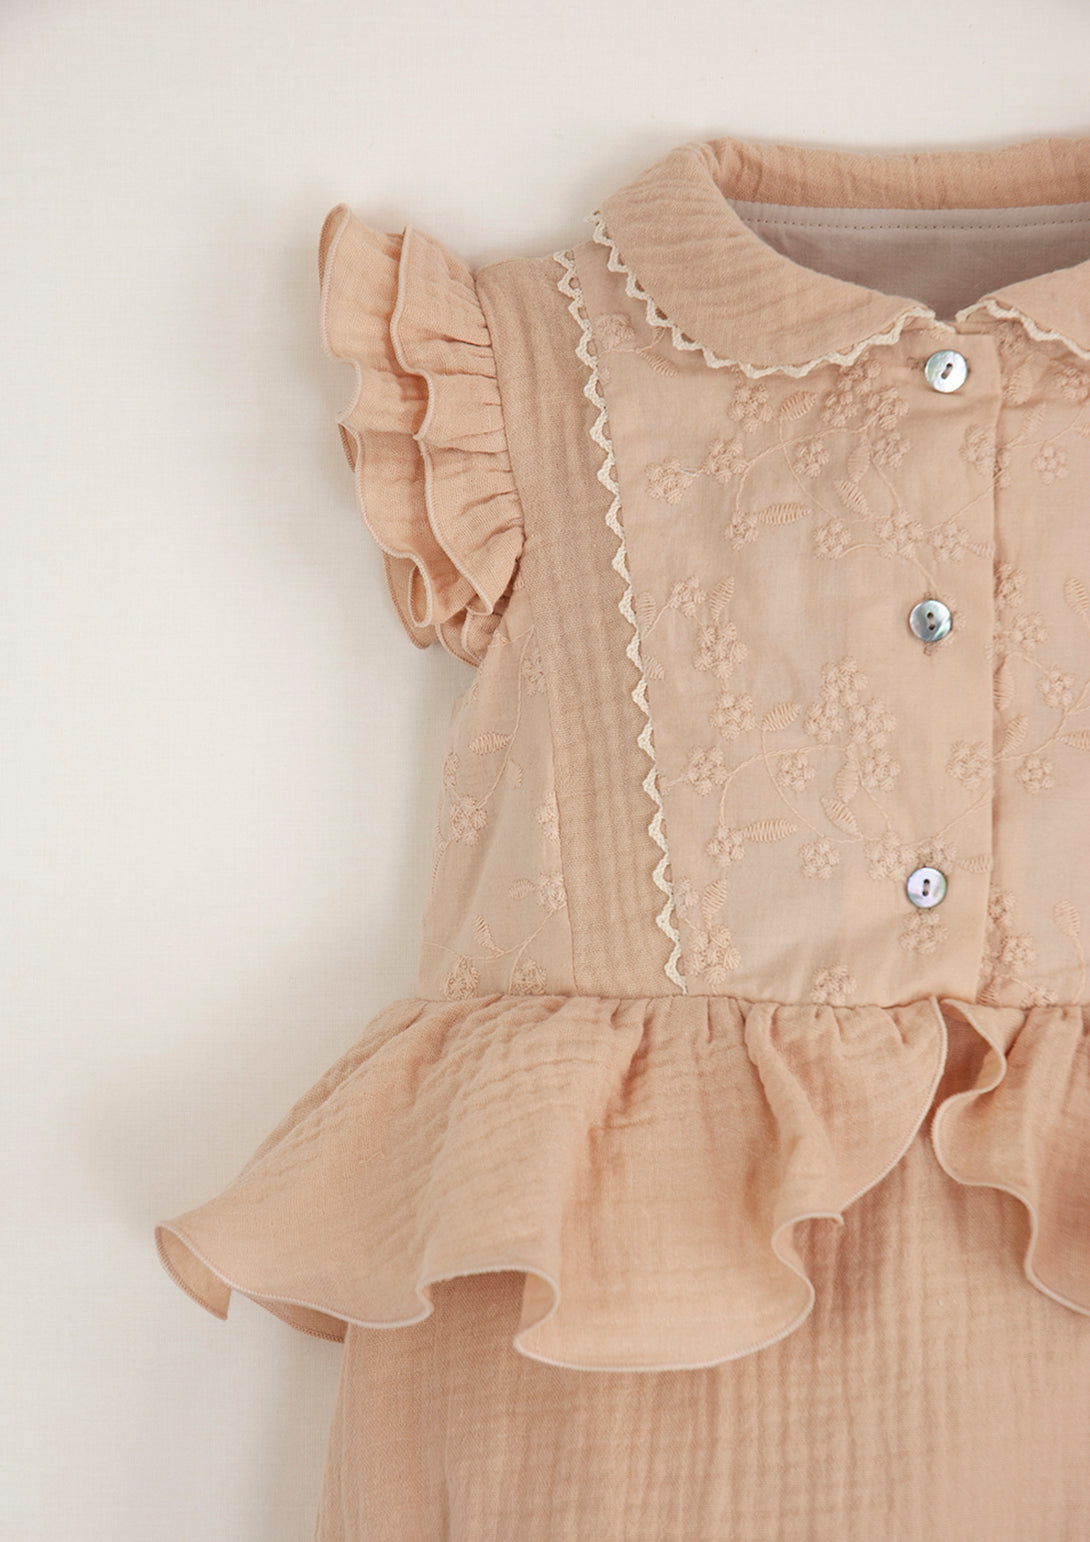 【Popelin】【40％off】Organic pink romper suit with collar  9-12m,12-18m,18-24m,2-3Y,  | Coucoubebe/ククベベ